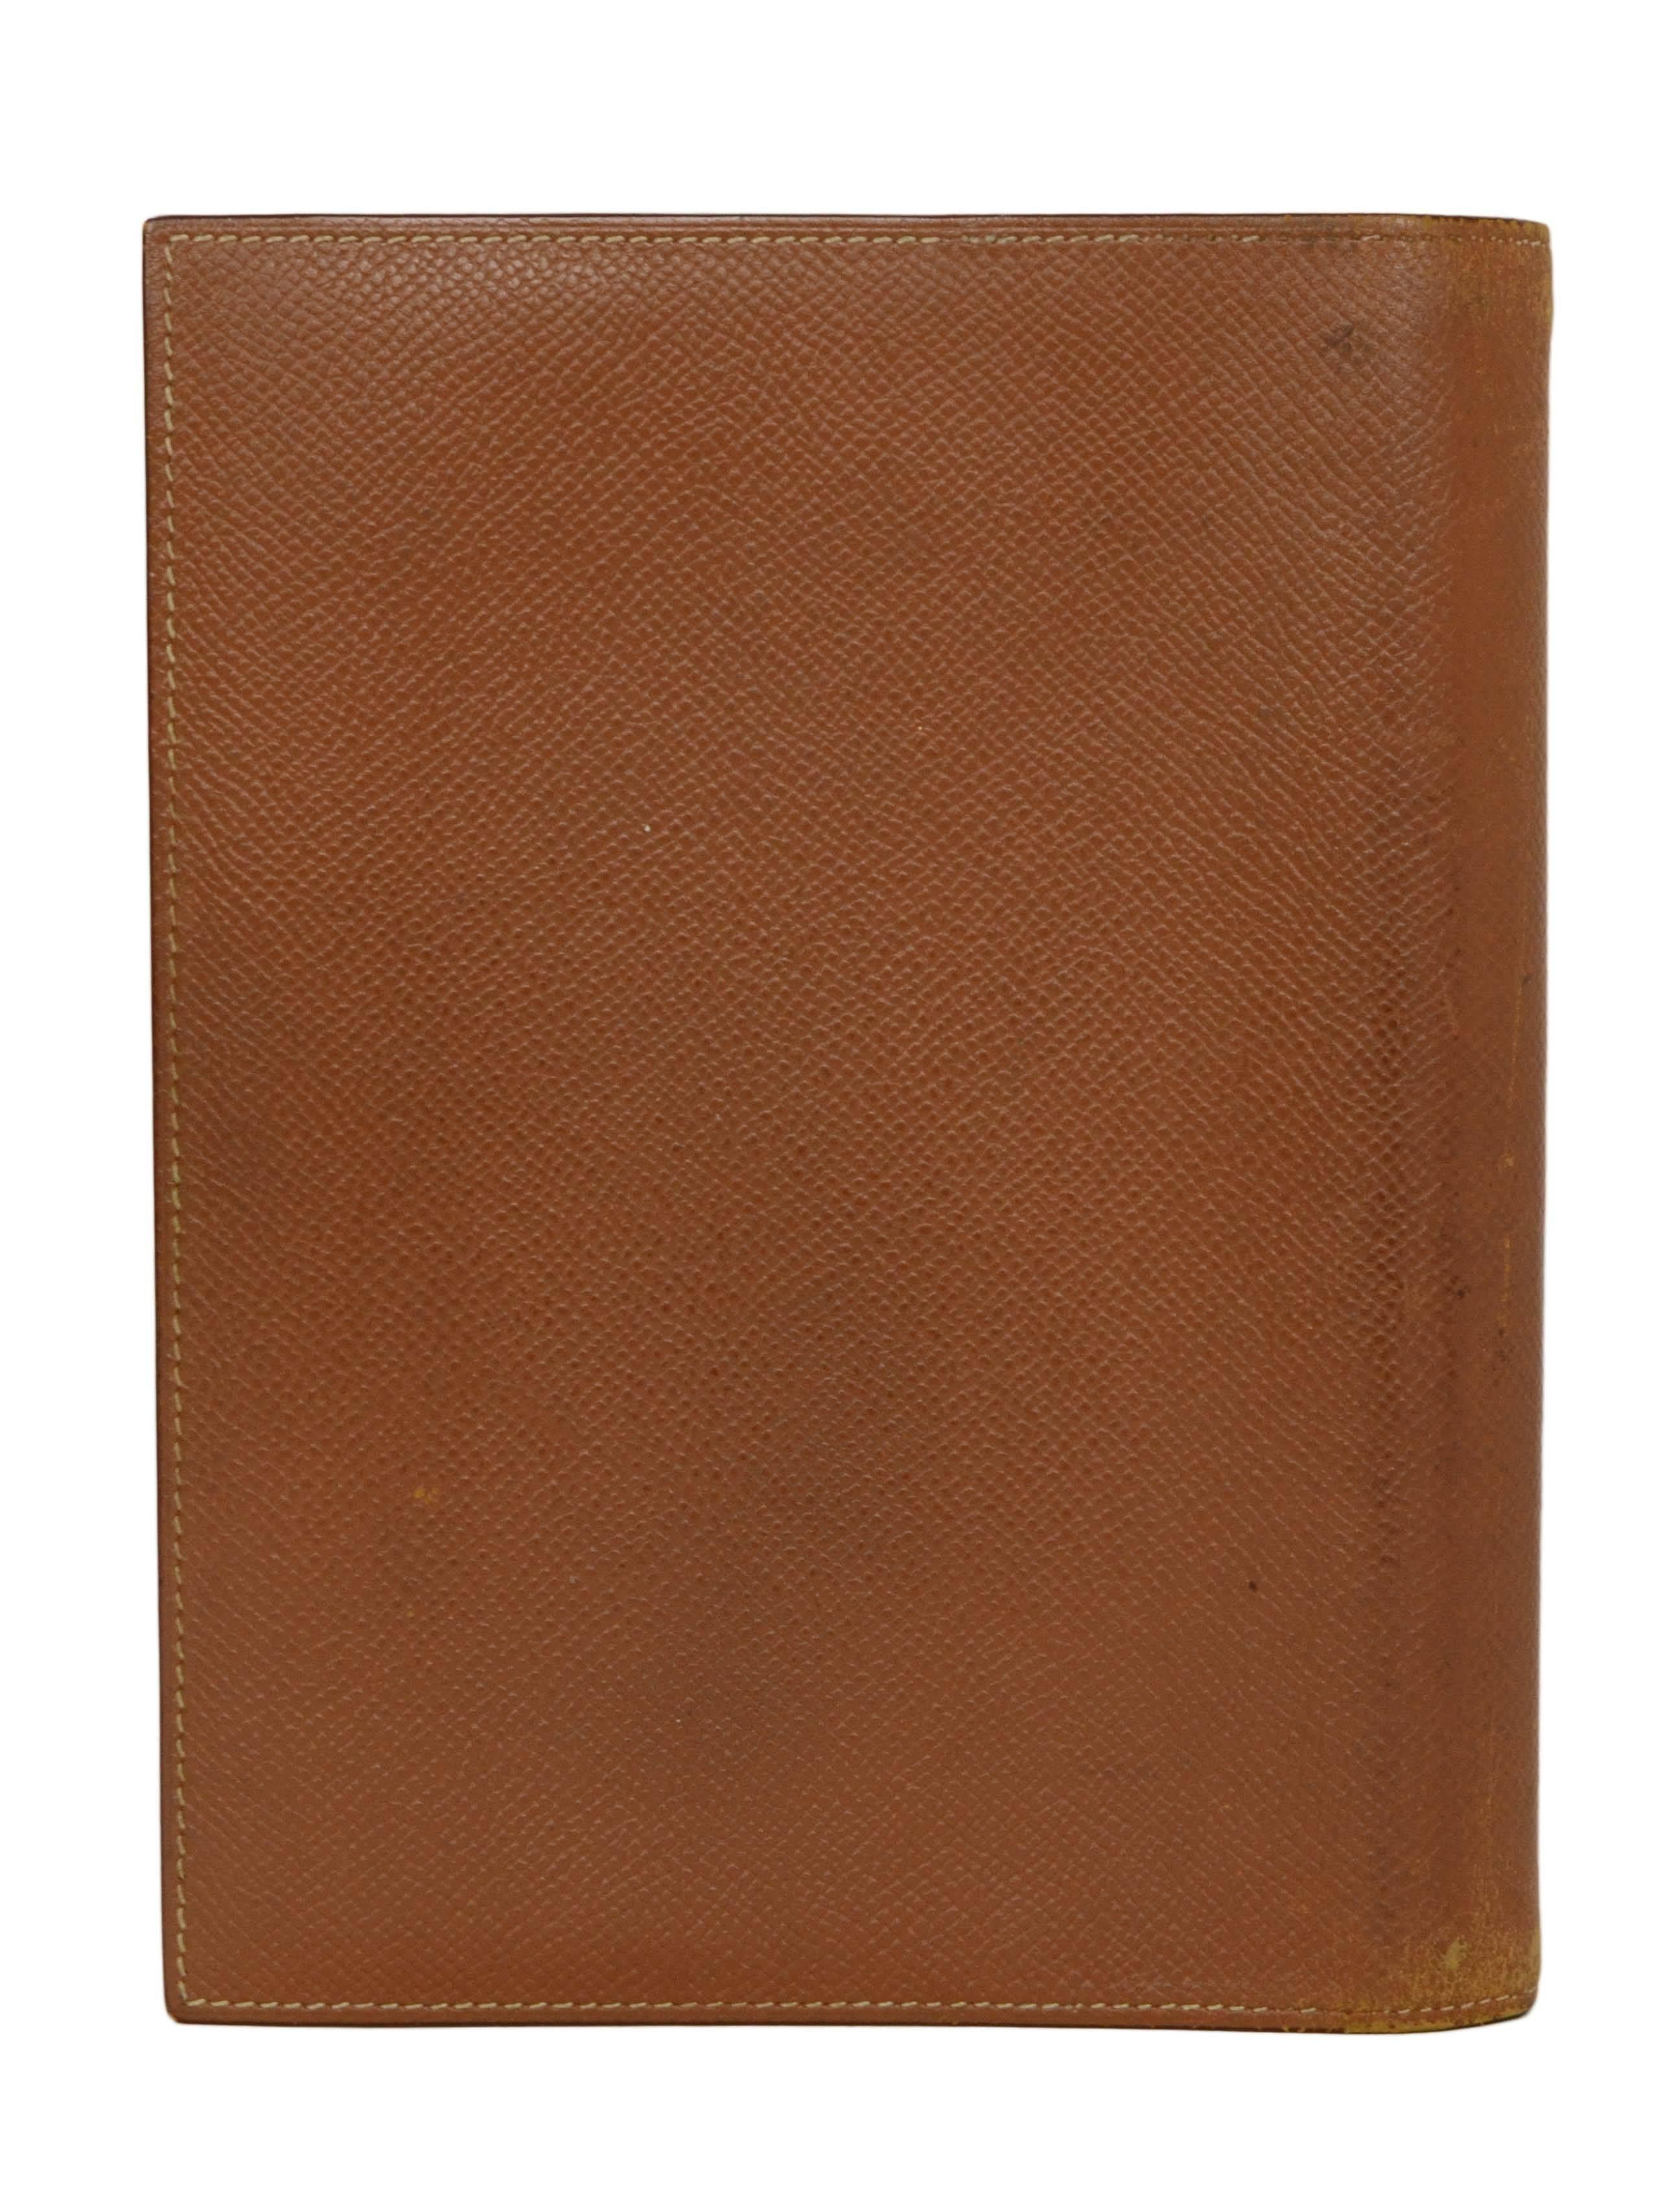 Hermes Vintage '99 Tan Leather Agenda Cover 
Made In: France
Year of Production: 1999
Color: Tan
Hardware: Palladium
Materials: Leather and metal
Lining: Tan leather
Closure: Bi-fold
Exterior Pockets: None
Interior Pockets: One vertical